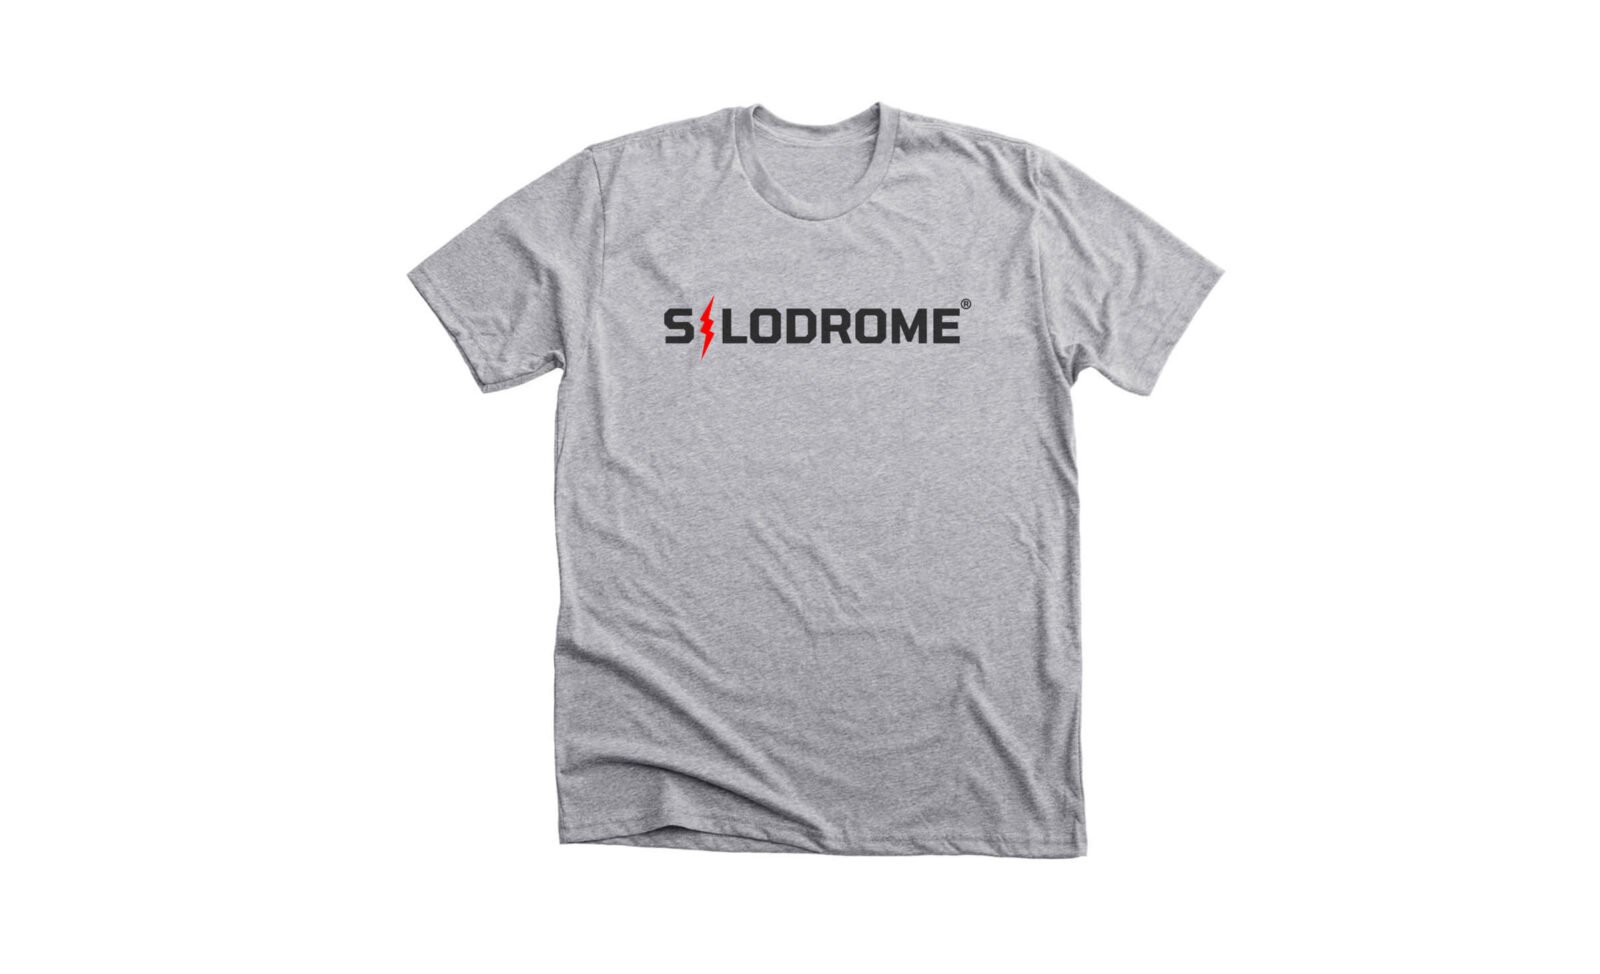 The Silodrome x Red Lightning Tee